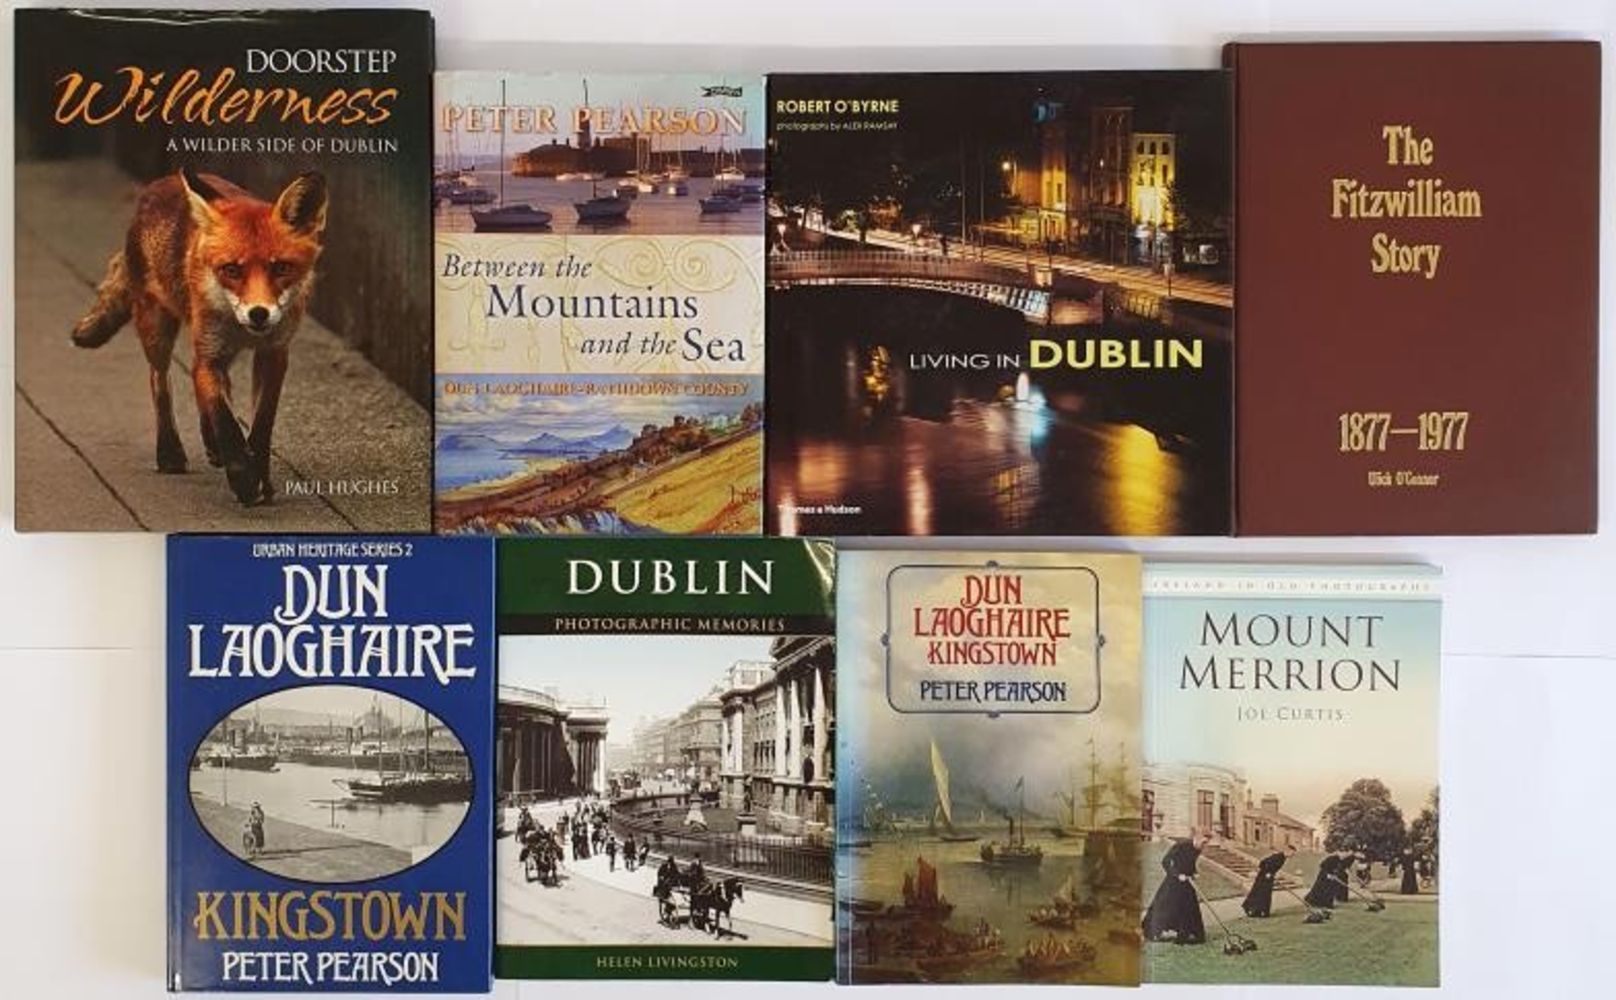 May Auction of a Collection of Irish & World Interest Books - Rare & Signed First Editions, Journals, Periodicals, Pamphlets, Ephemera, Etc.